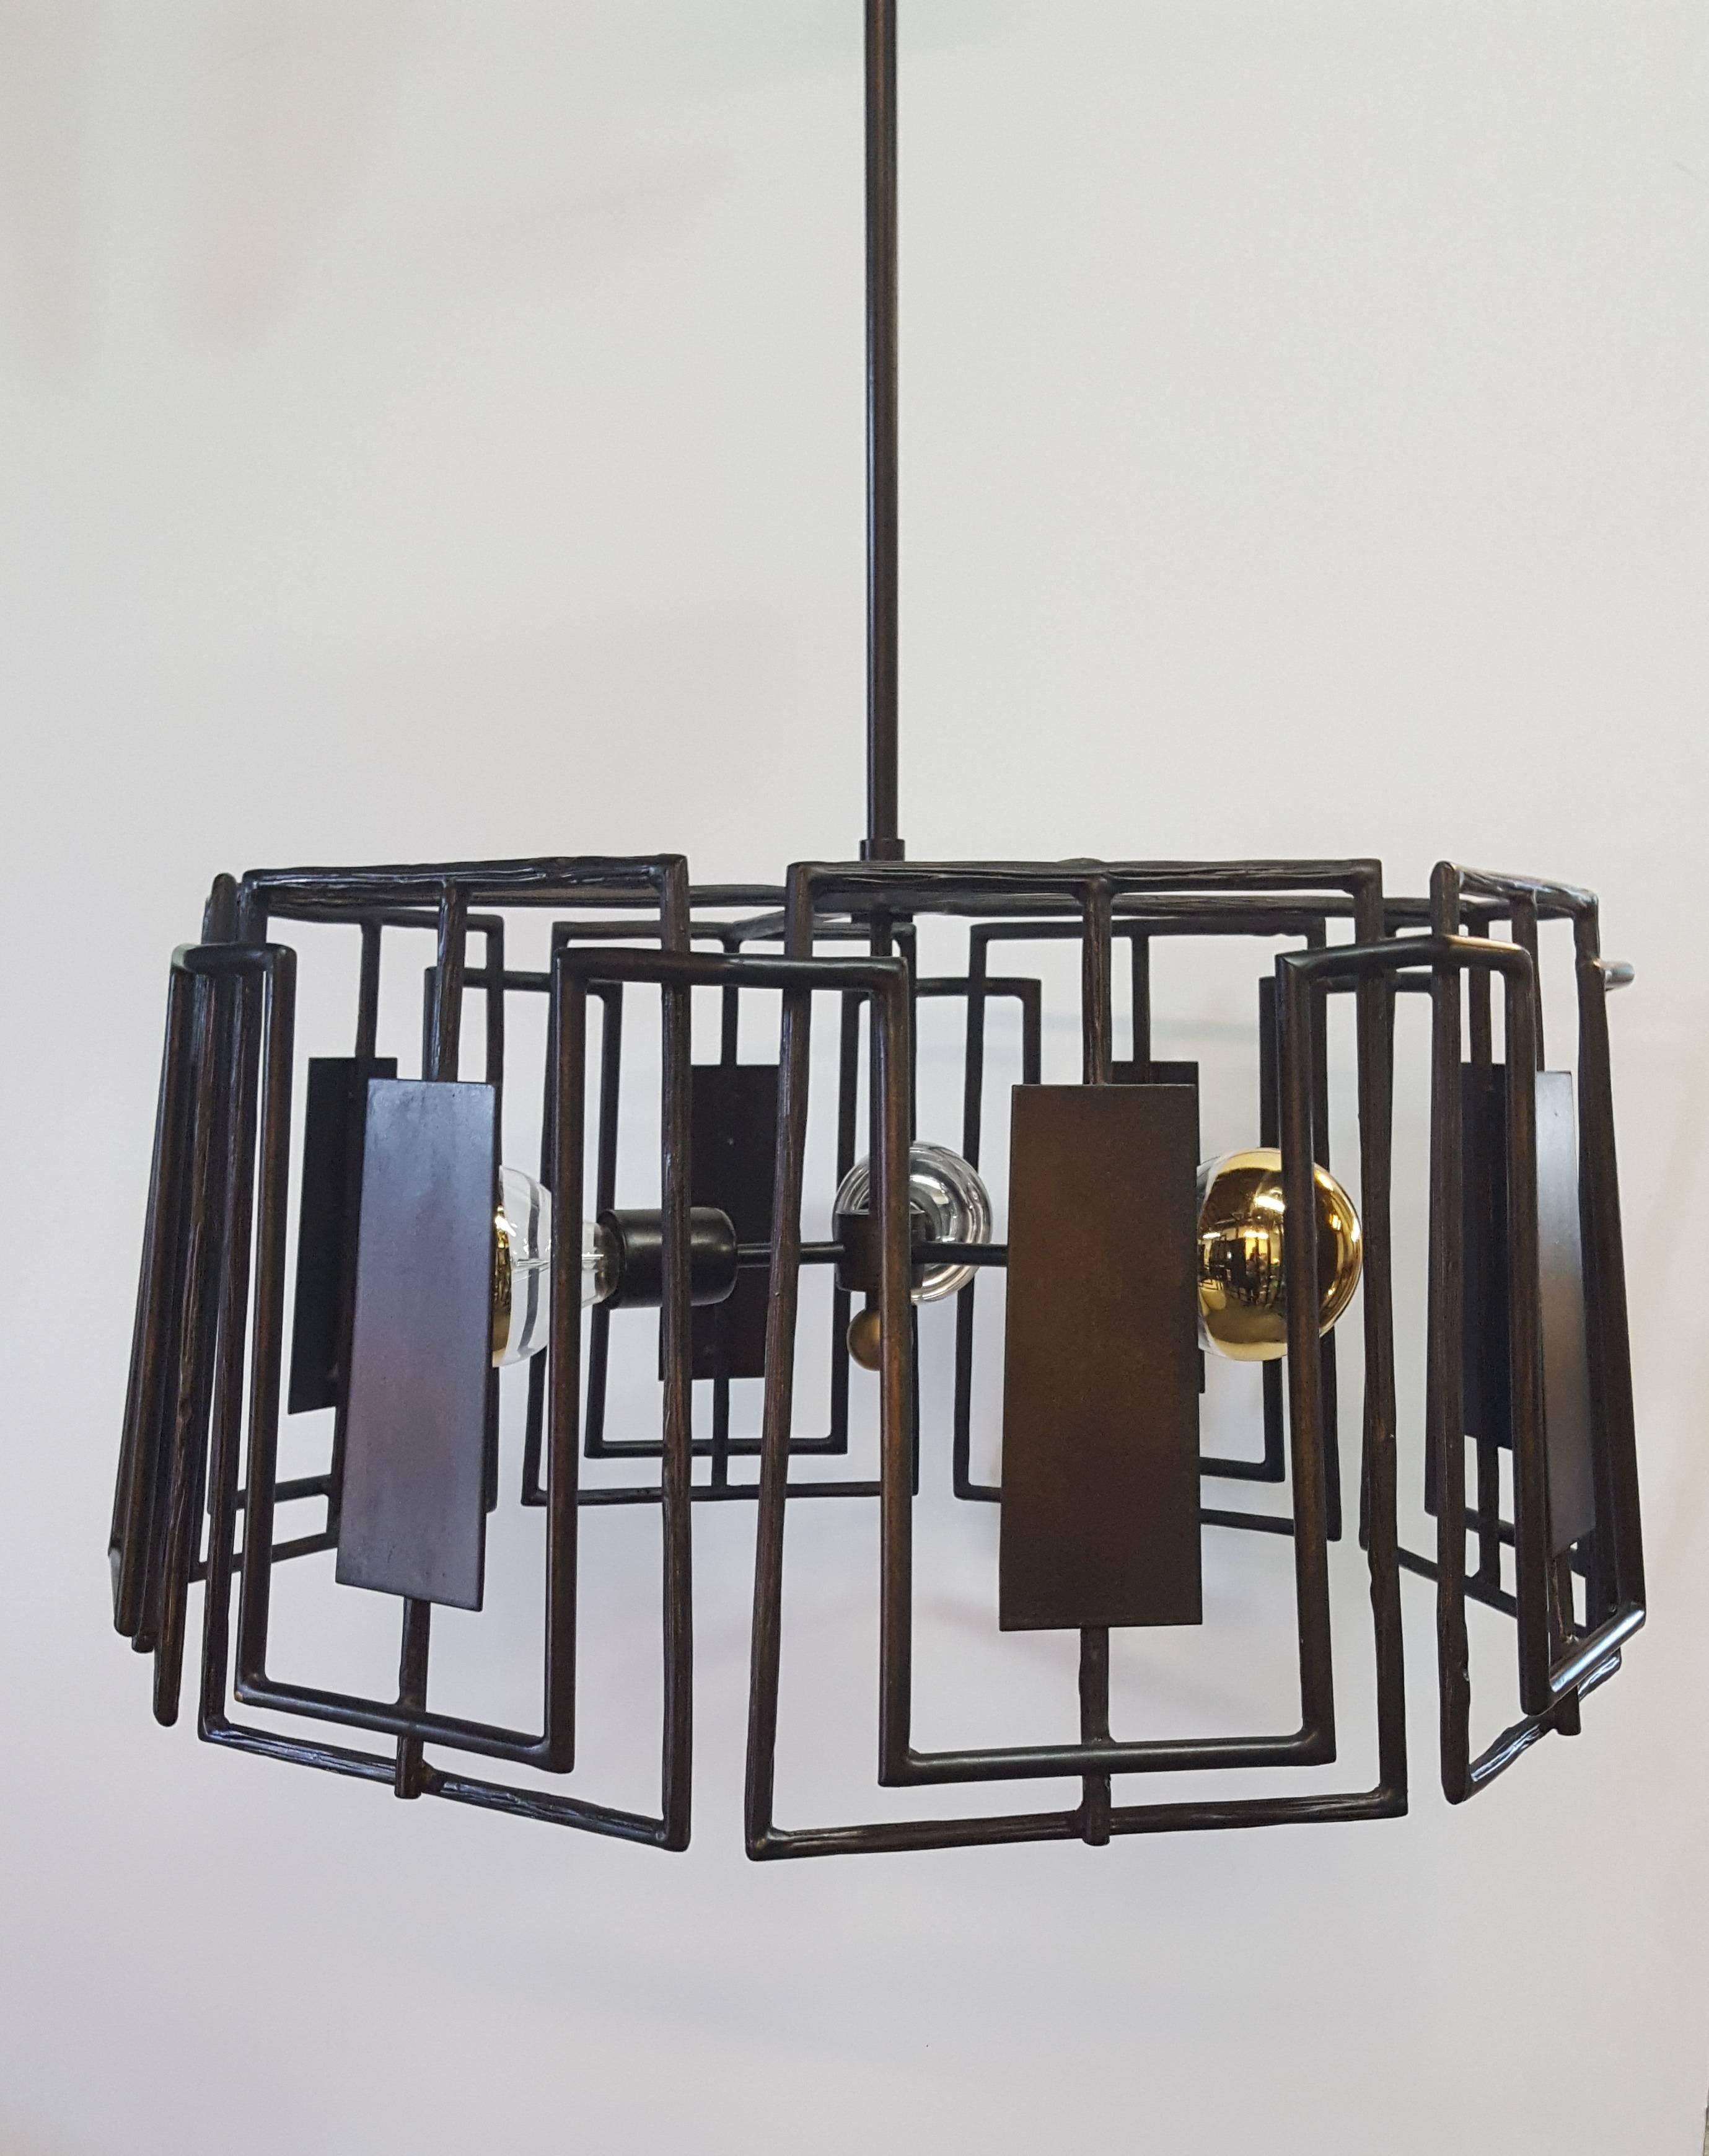 Trellis chandelier by Paul Marra. A modern fixture, in the organic modern or brutalist style. Hand-forged sculptured iron in faux bois pattern that varies throughout. Oil rubbed bronze finish. Brushed brass finial. Lamp bulbs shown as example only,